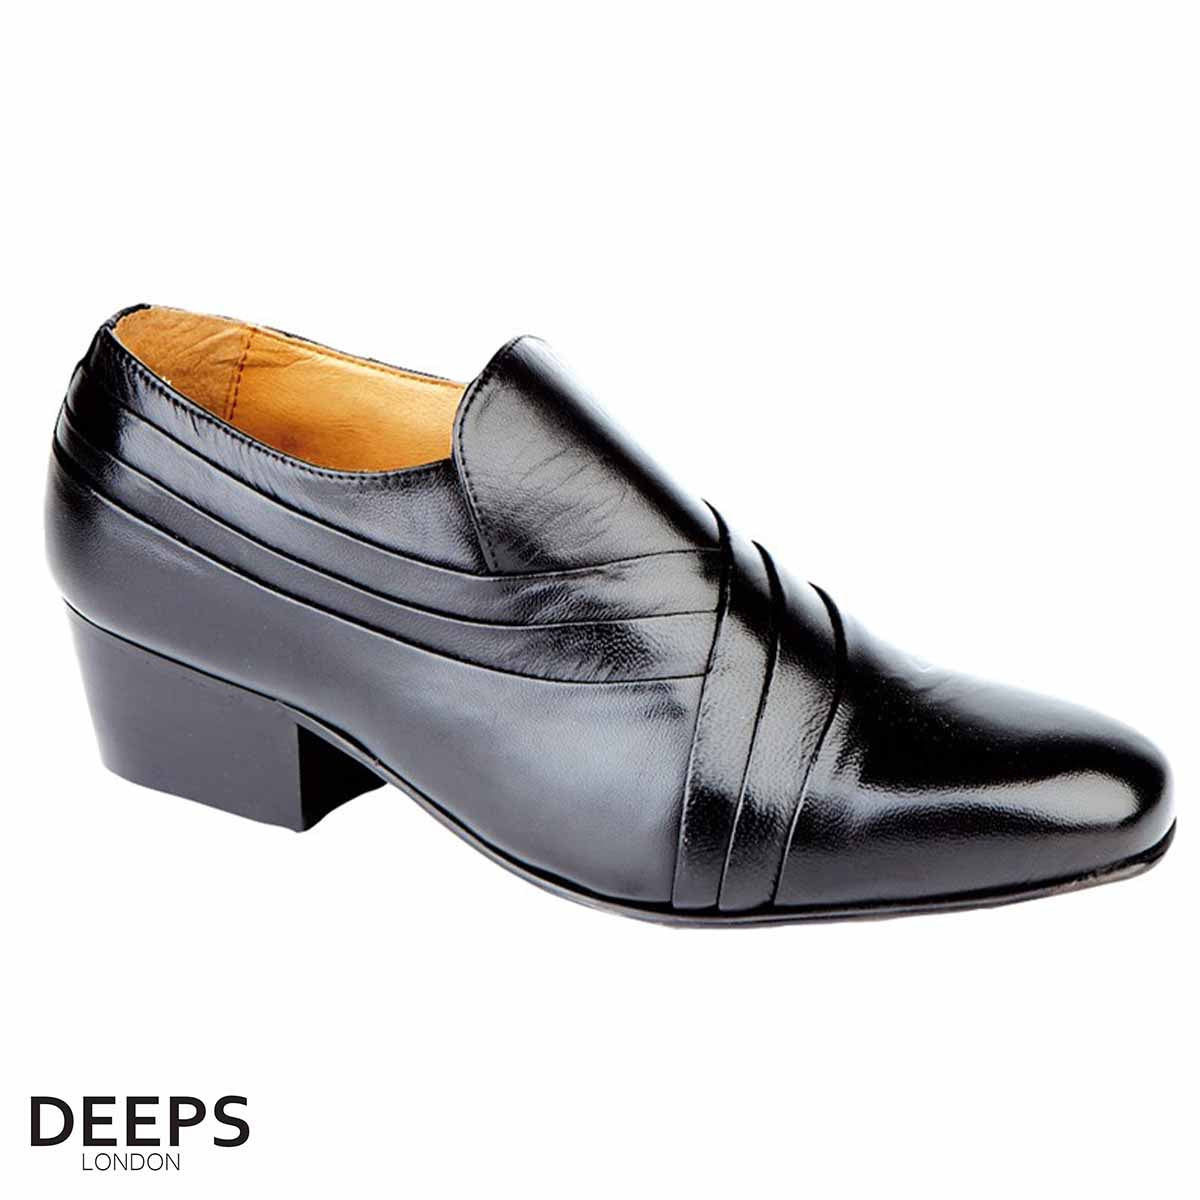 ALID - MEN'S CUBAN HEEL FORMAL CASUAL PARTY WEDDING LEATHER SHOES BLACK